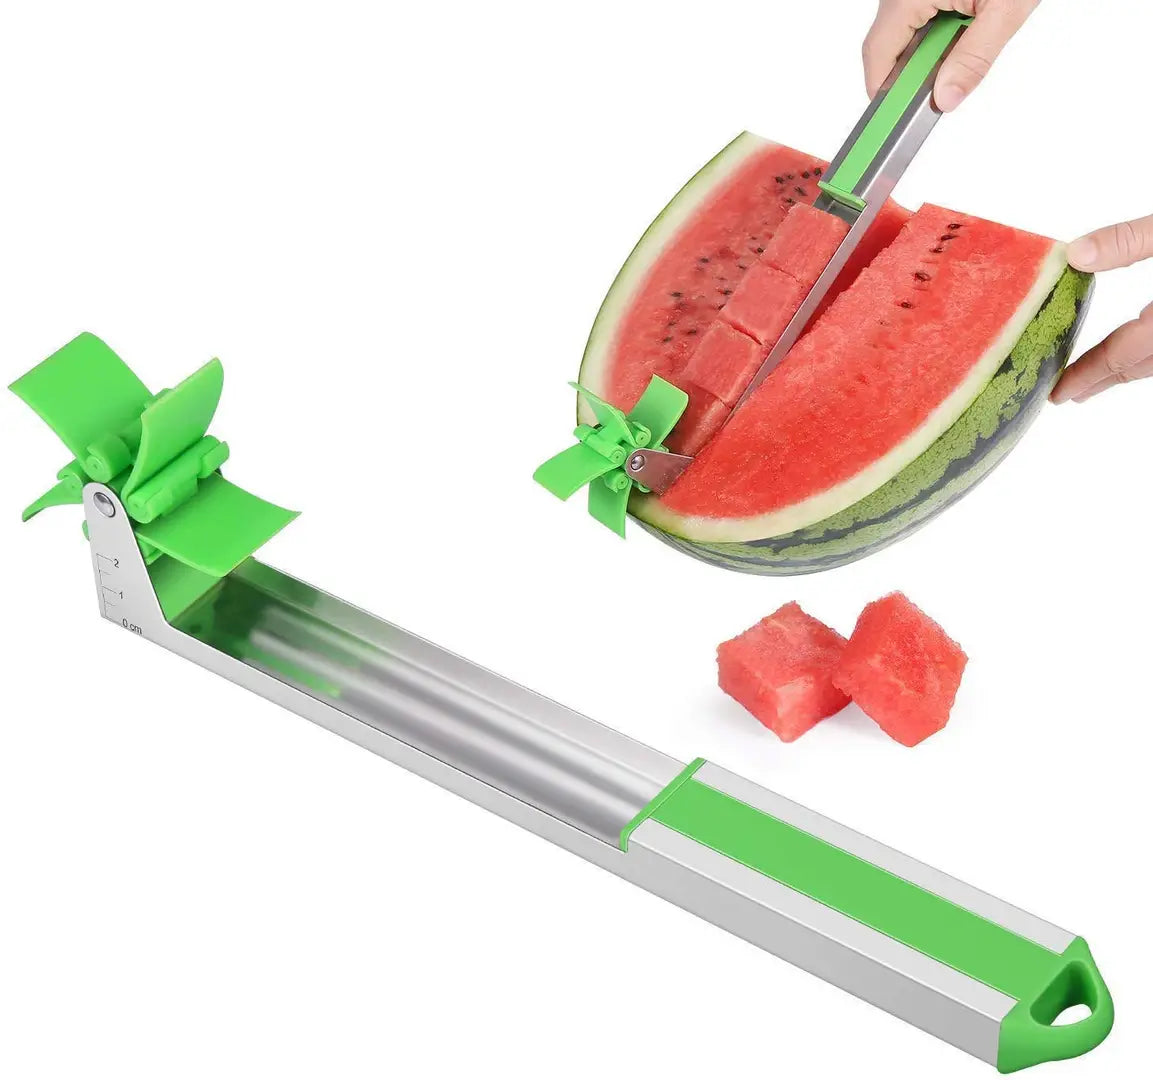 Stainless Steel Amazing Watermelon Fruit Dig Corer Cutter  Server Fruit Dividers Windmill Slicer Cutter Fruit Tongs Melon Peeler Cuber Fun Kitchen Gadgets for Home/Kitchen/Party